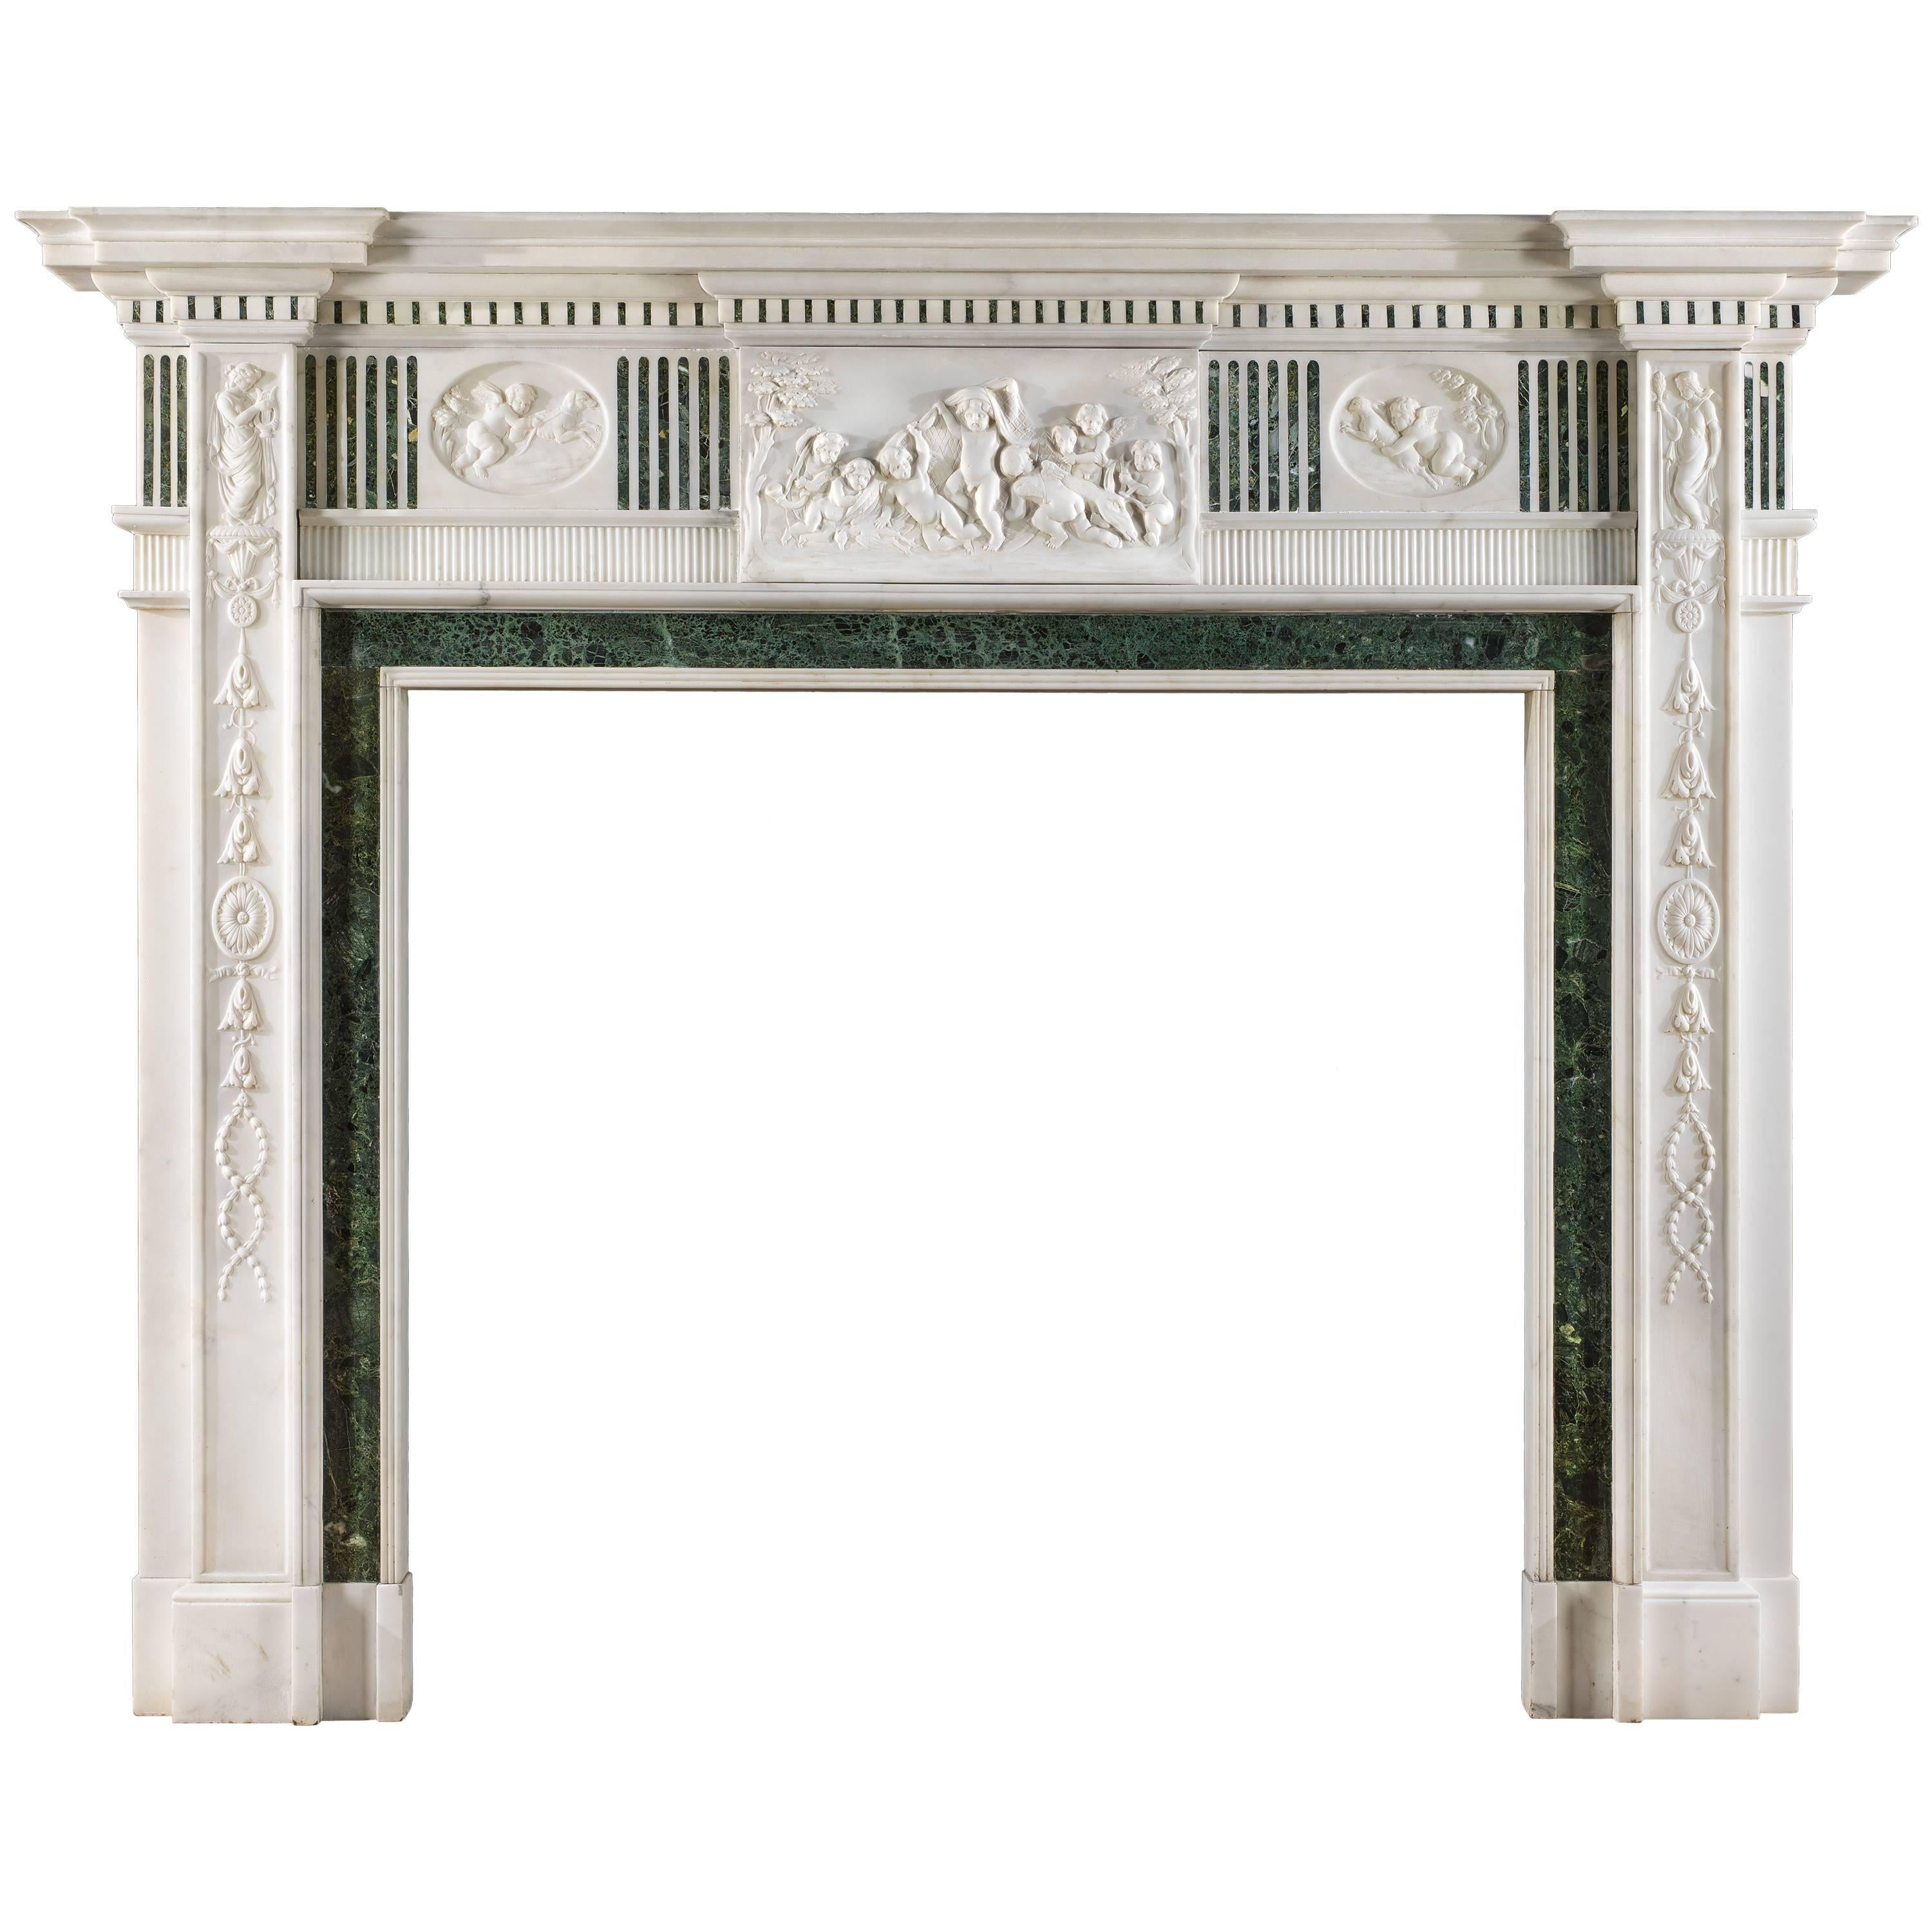  Early 20th Century Statuary and Inlaid Verde Antico Marble Fireplace Mantel